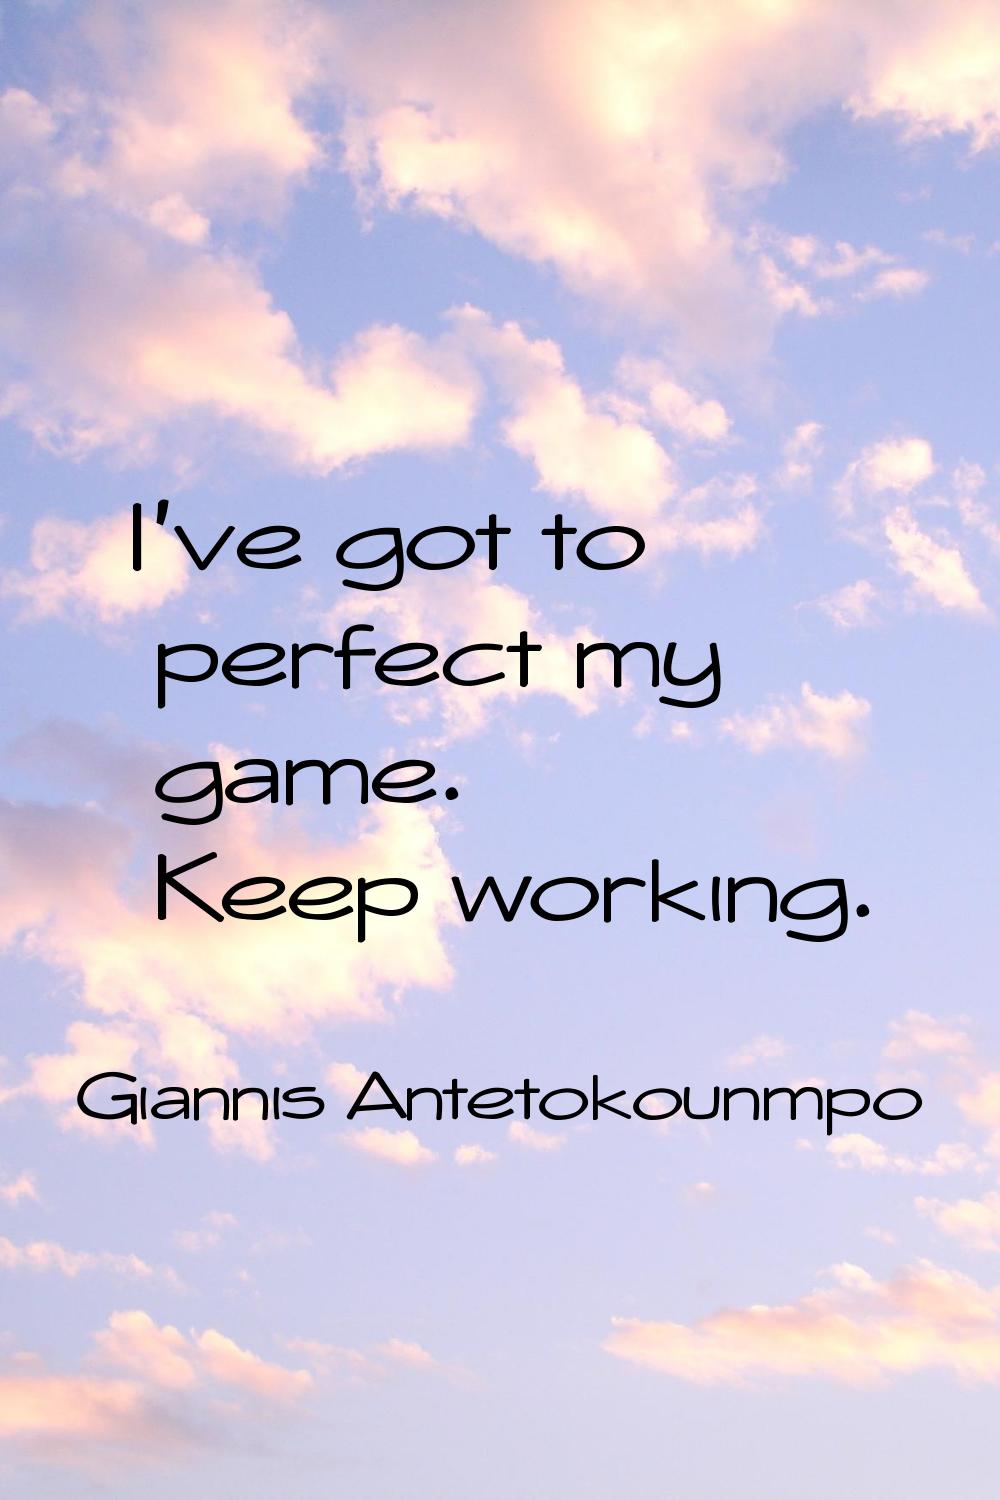 I've got to perfect my game. Keep working.